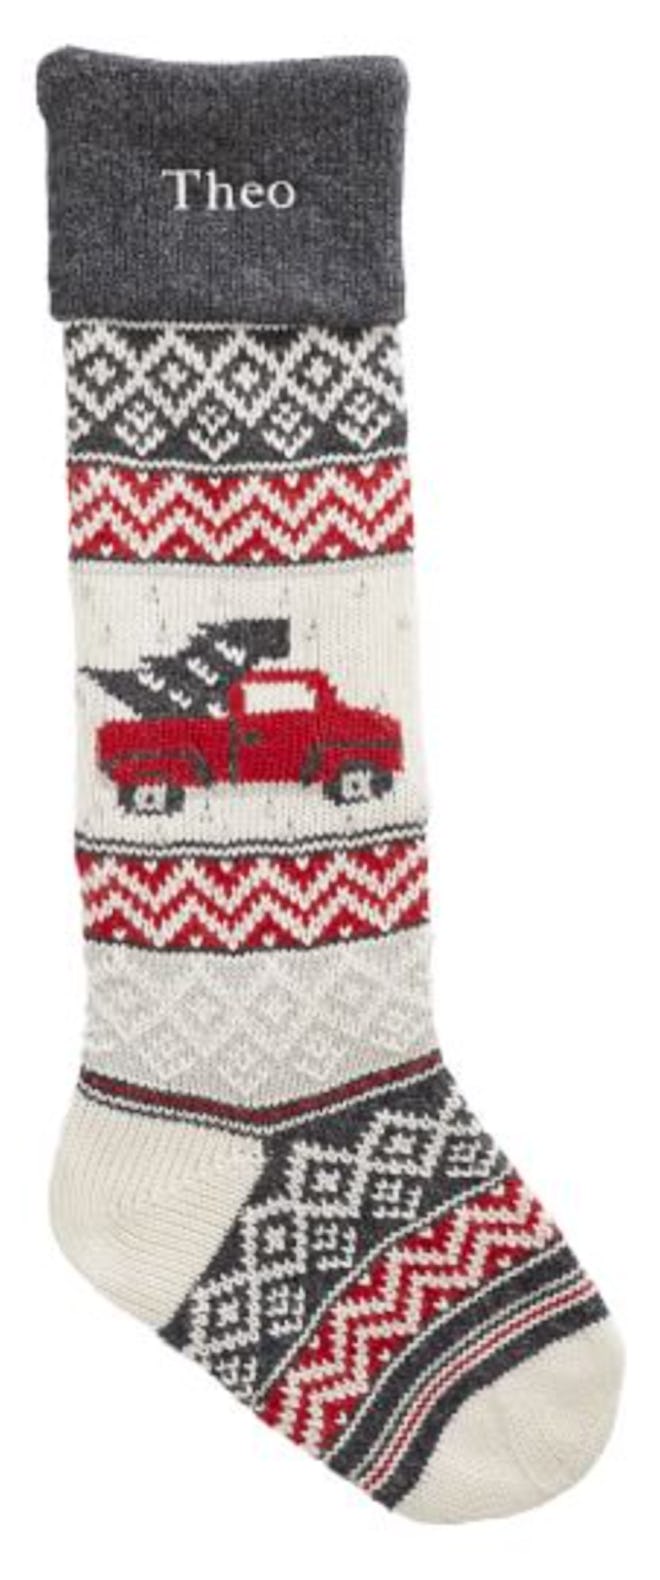 Image of a holiday stocking with personalized name from Pottery Barn Kids.